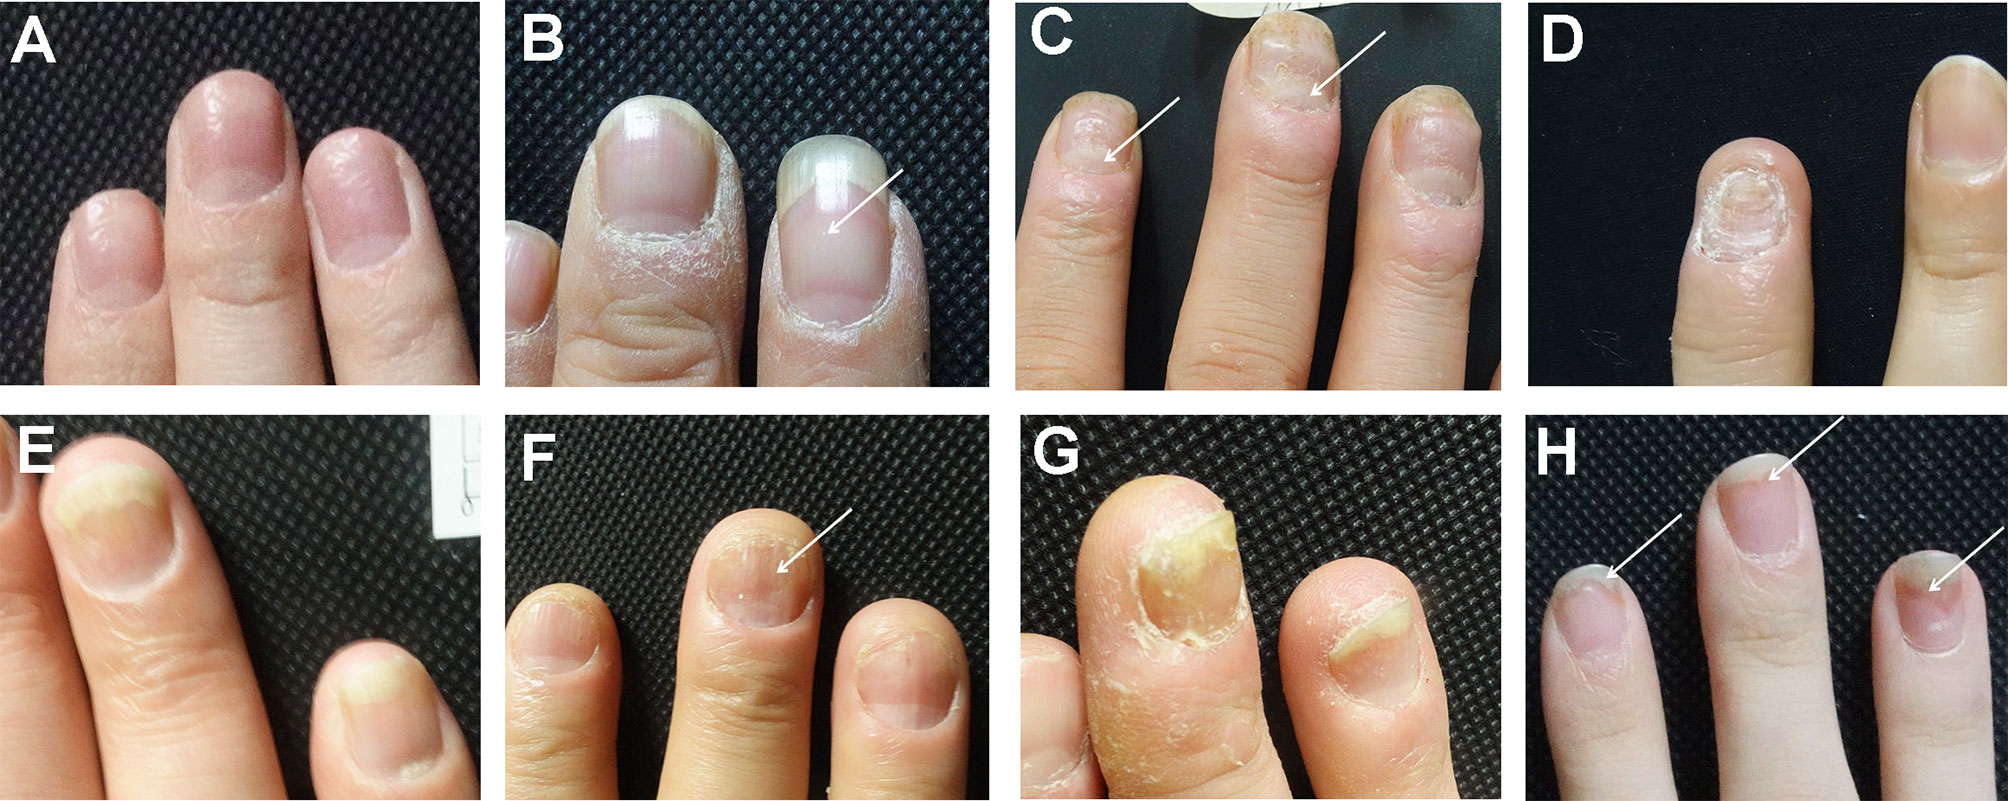 People with Nail Psoriasis May Have a Higher Chance of Developing PsA